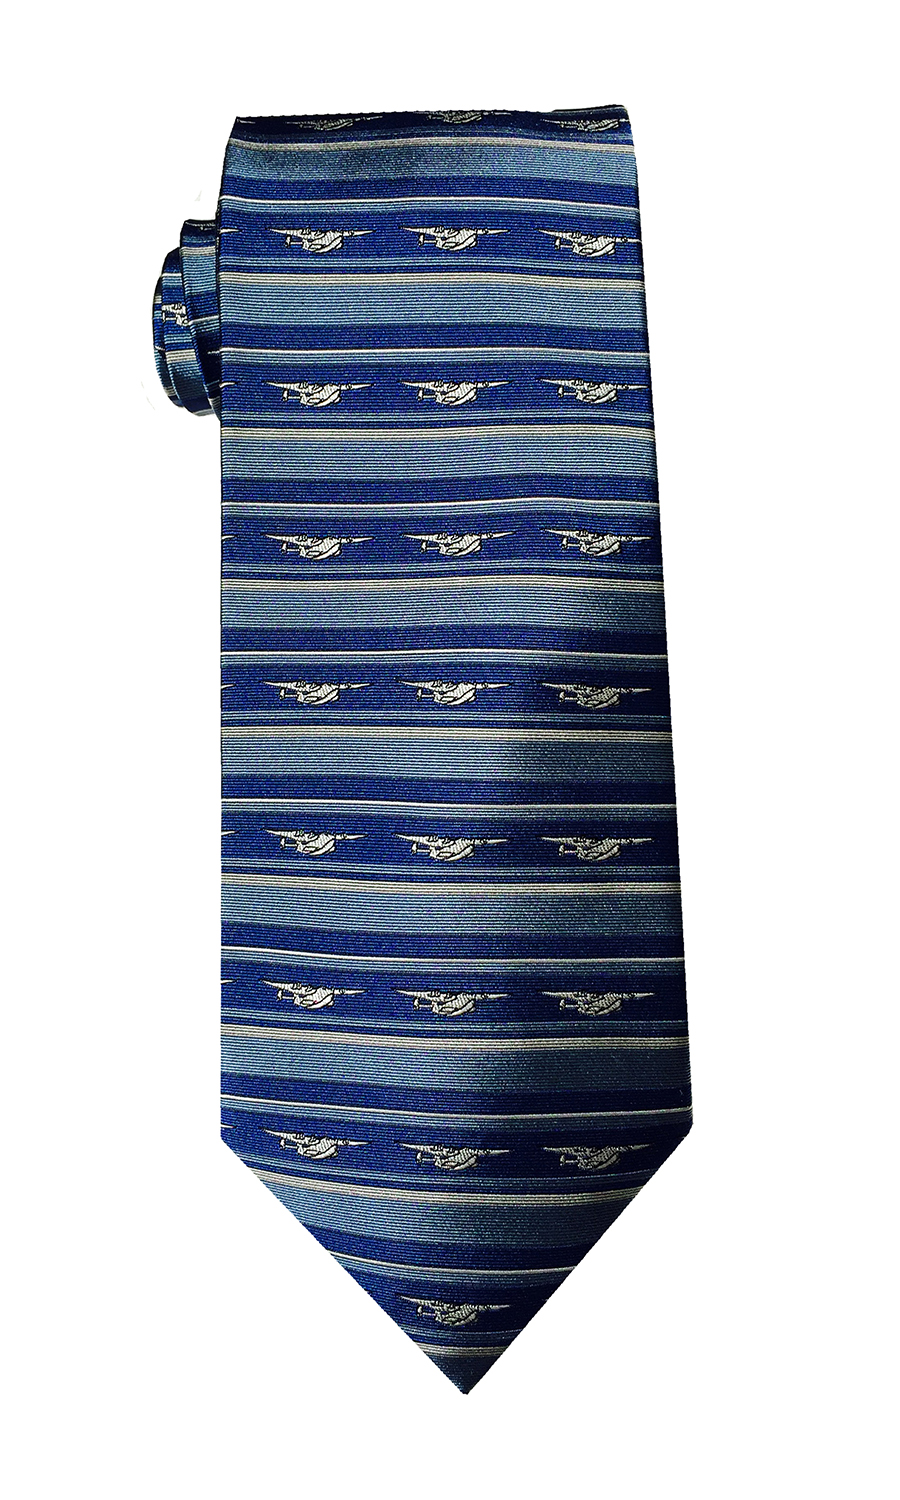 Clipper Flying Boat tie in marine blue and dusk